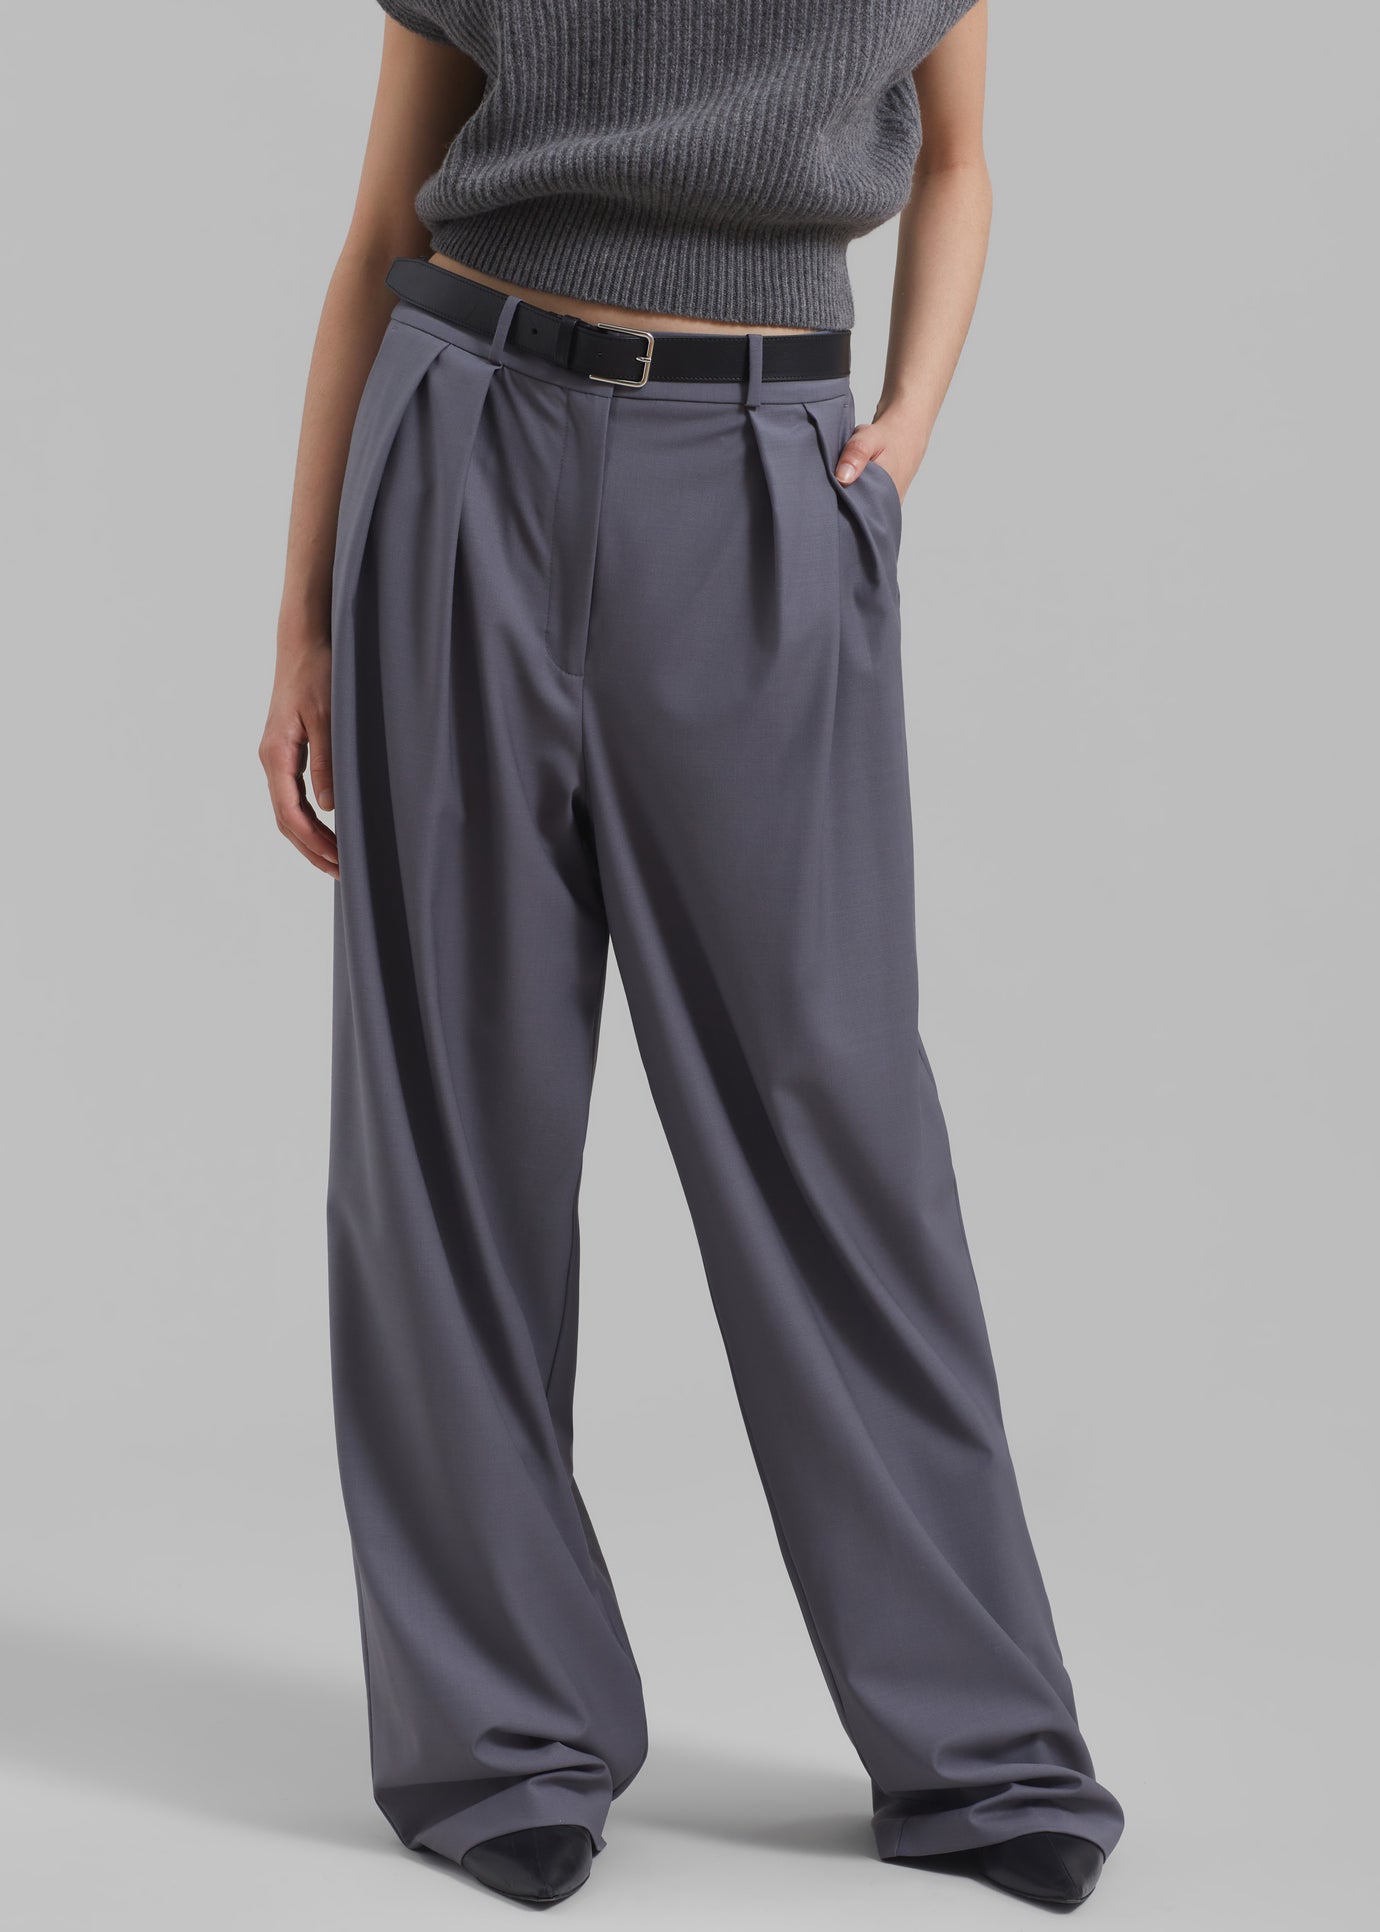 Ripley Pleated Trousers - Grey - 1